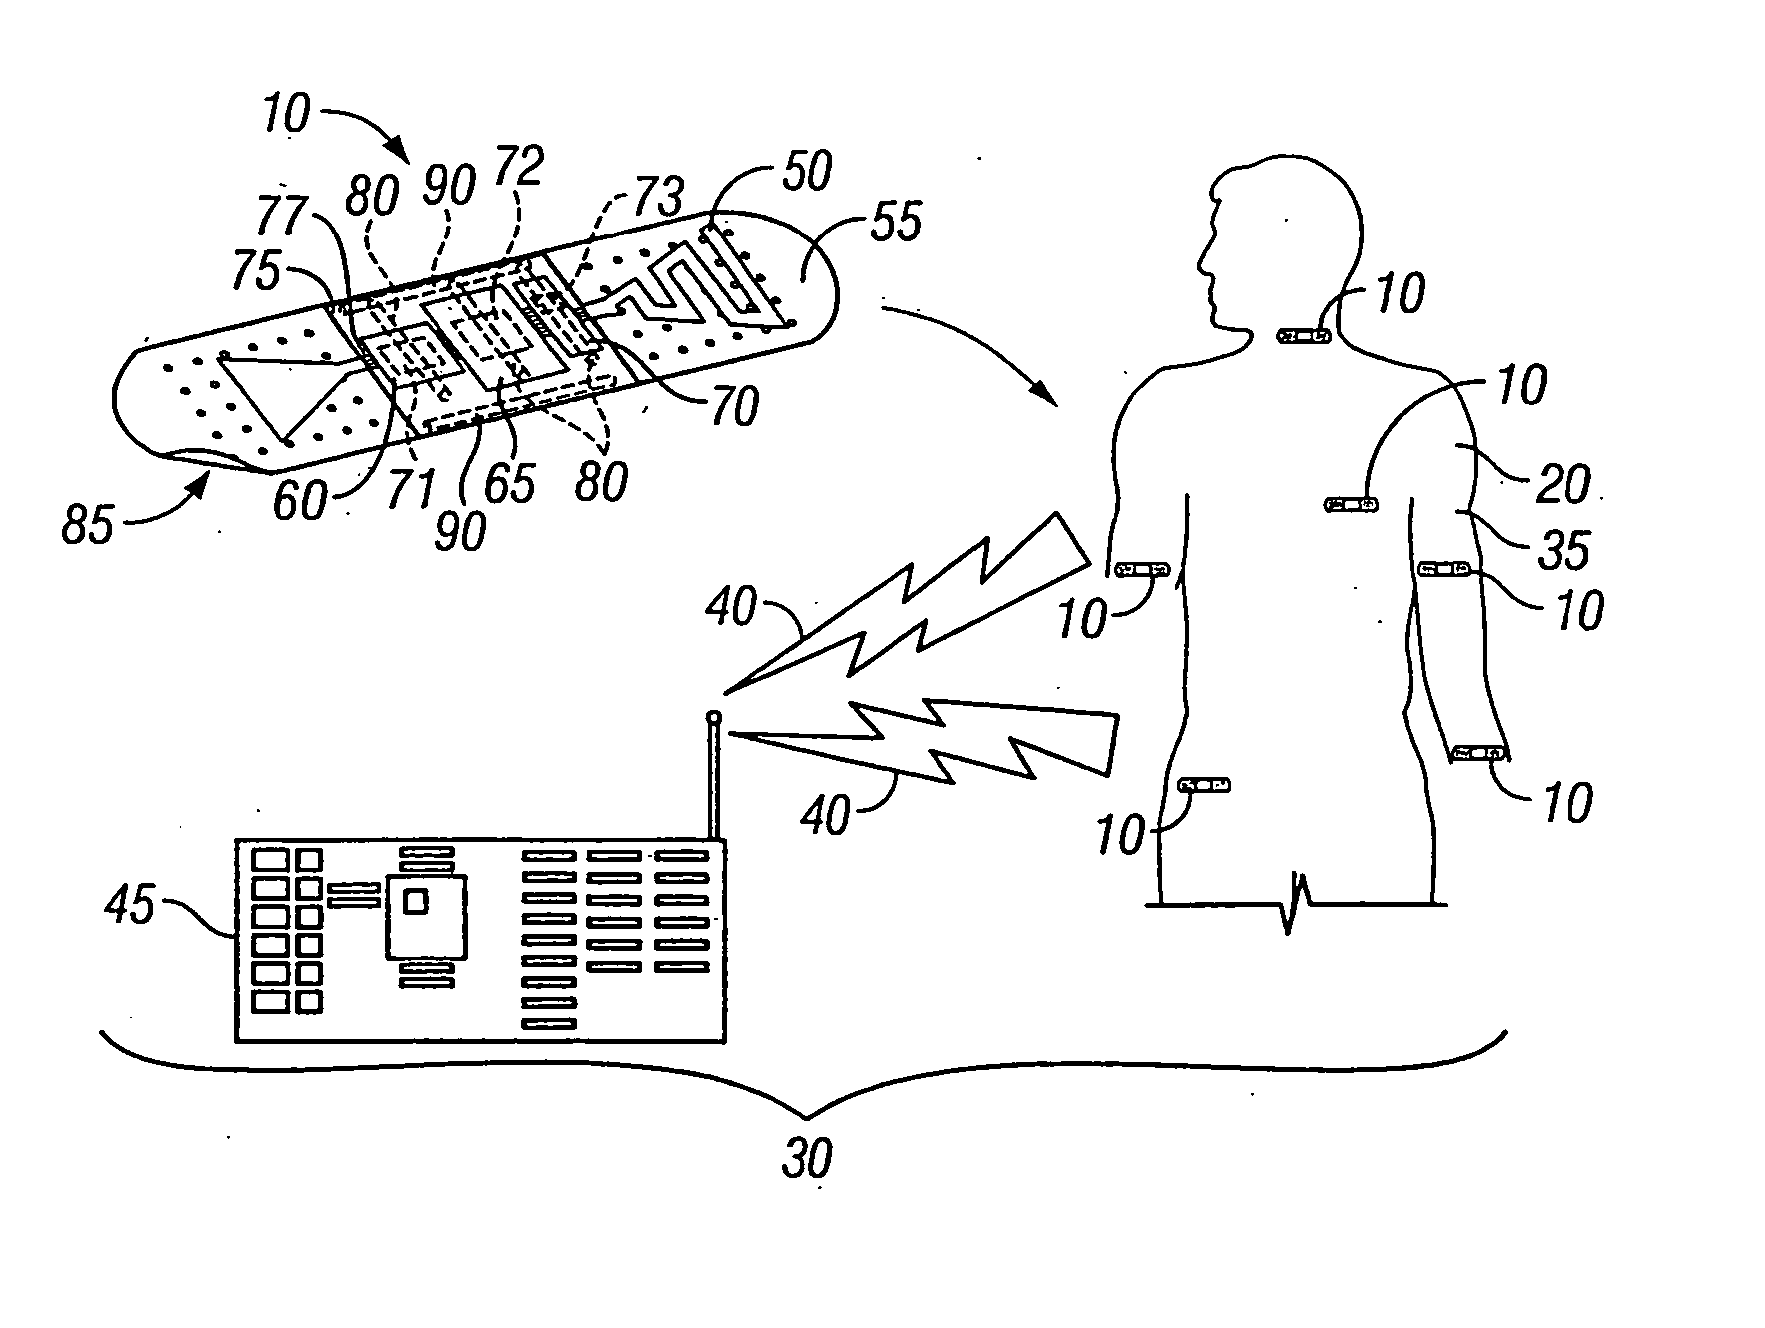 Wearable biomonitor with flexible thinned integrated circuit